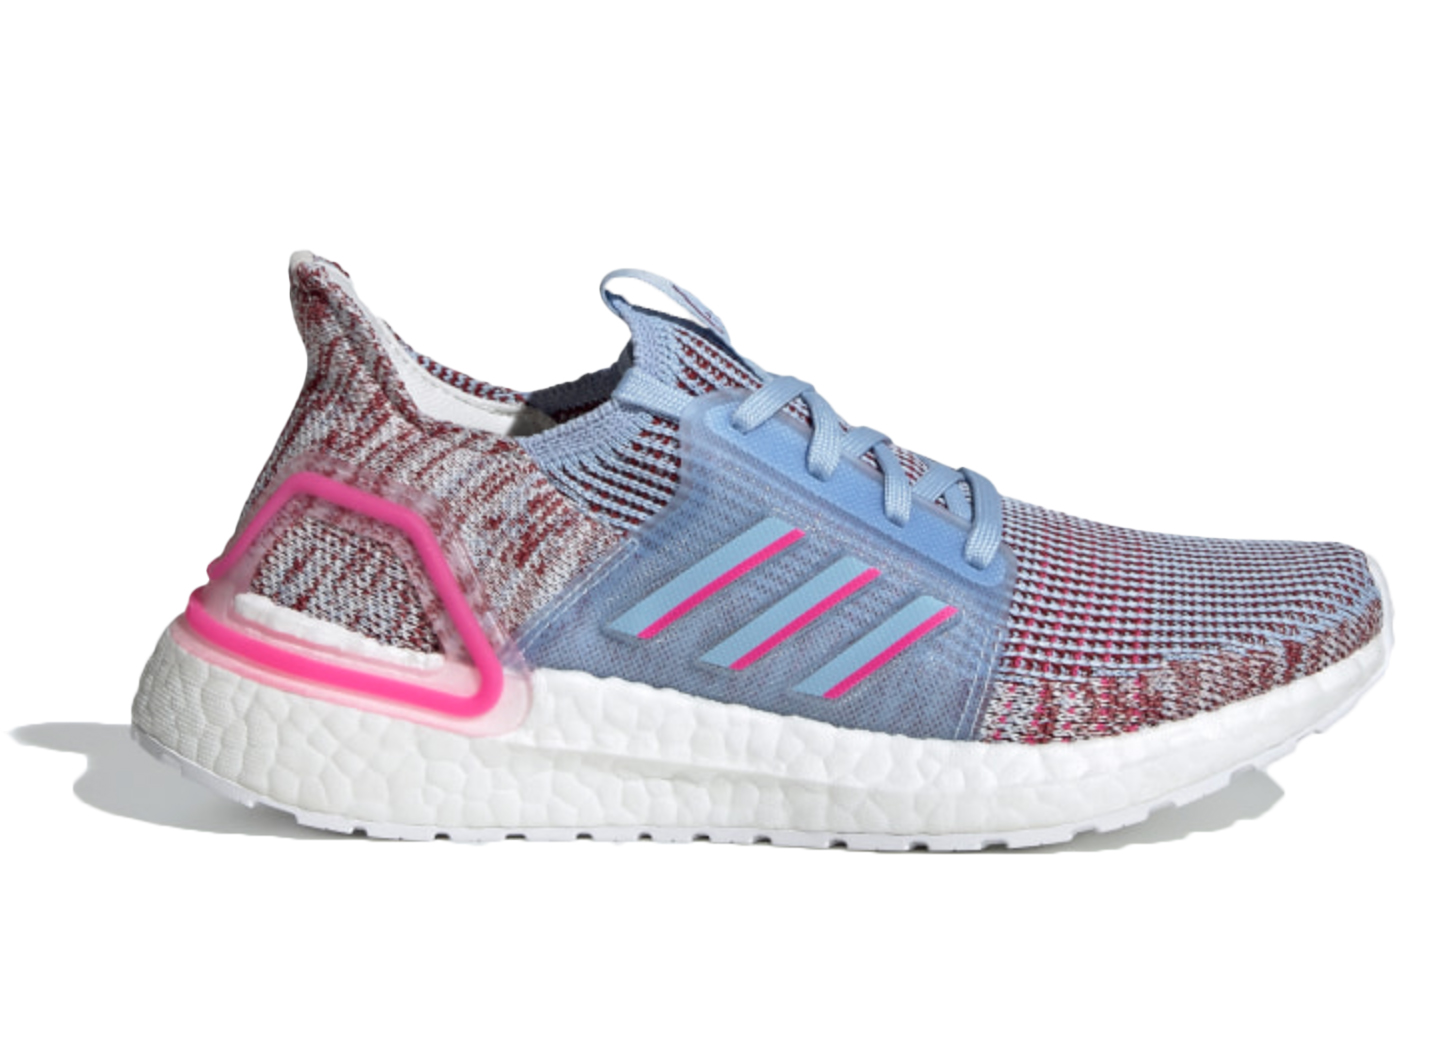 adidas ultra boost pink and blue